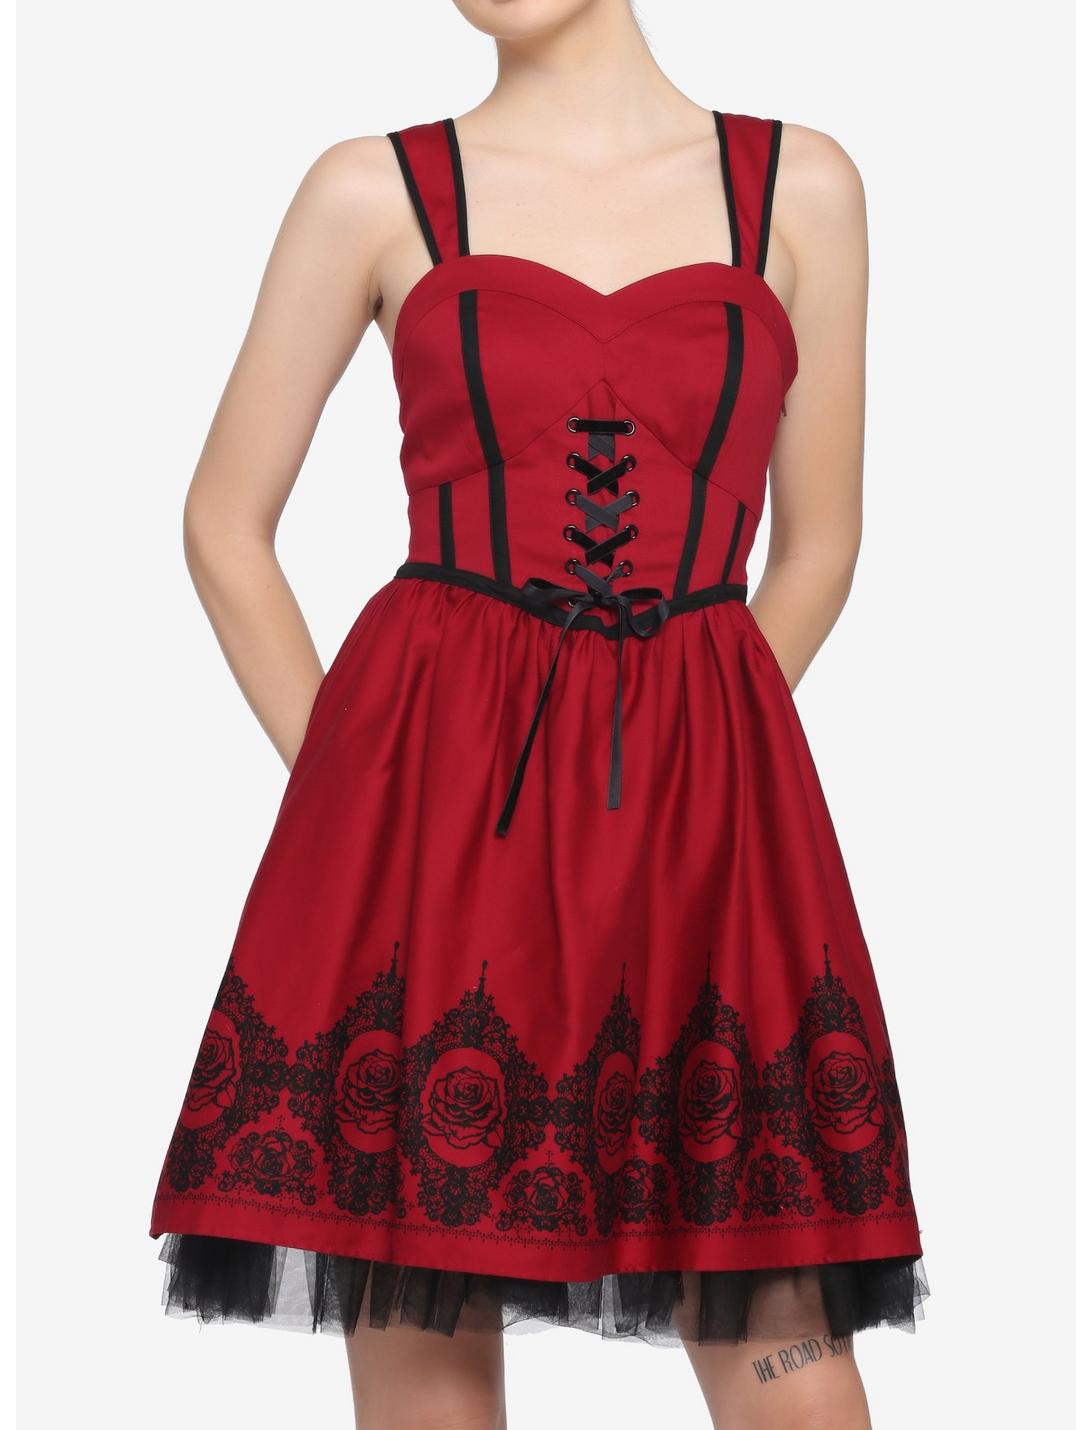 Red Roses Lace-Front Dress, RED, hi-res